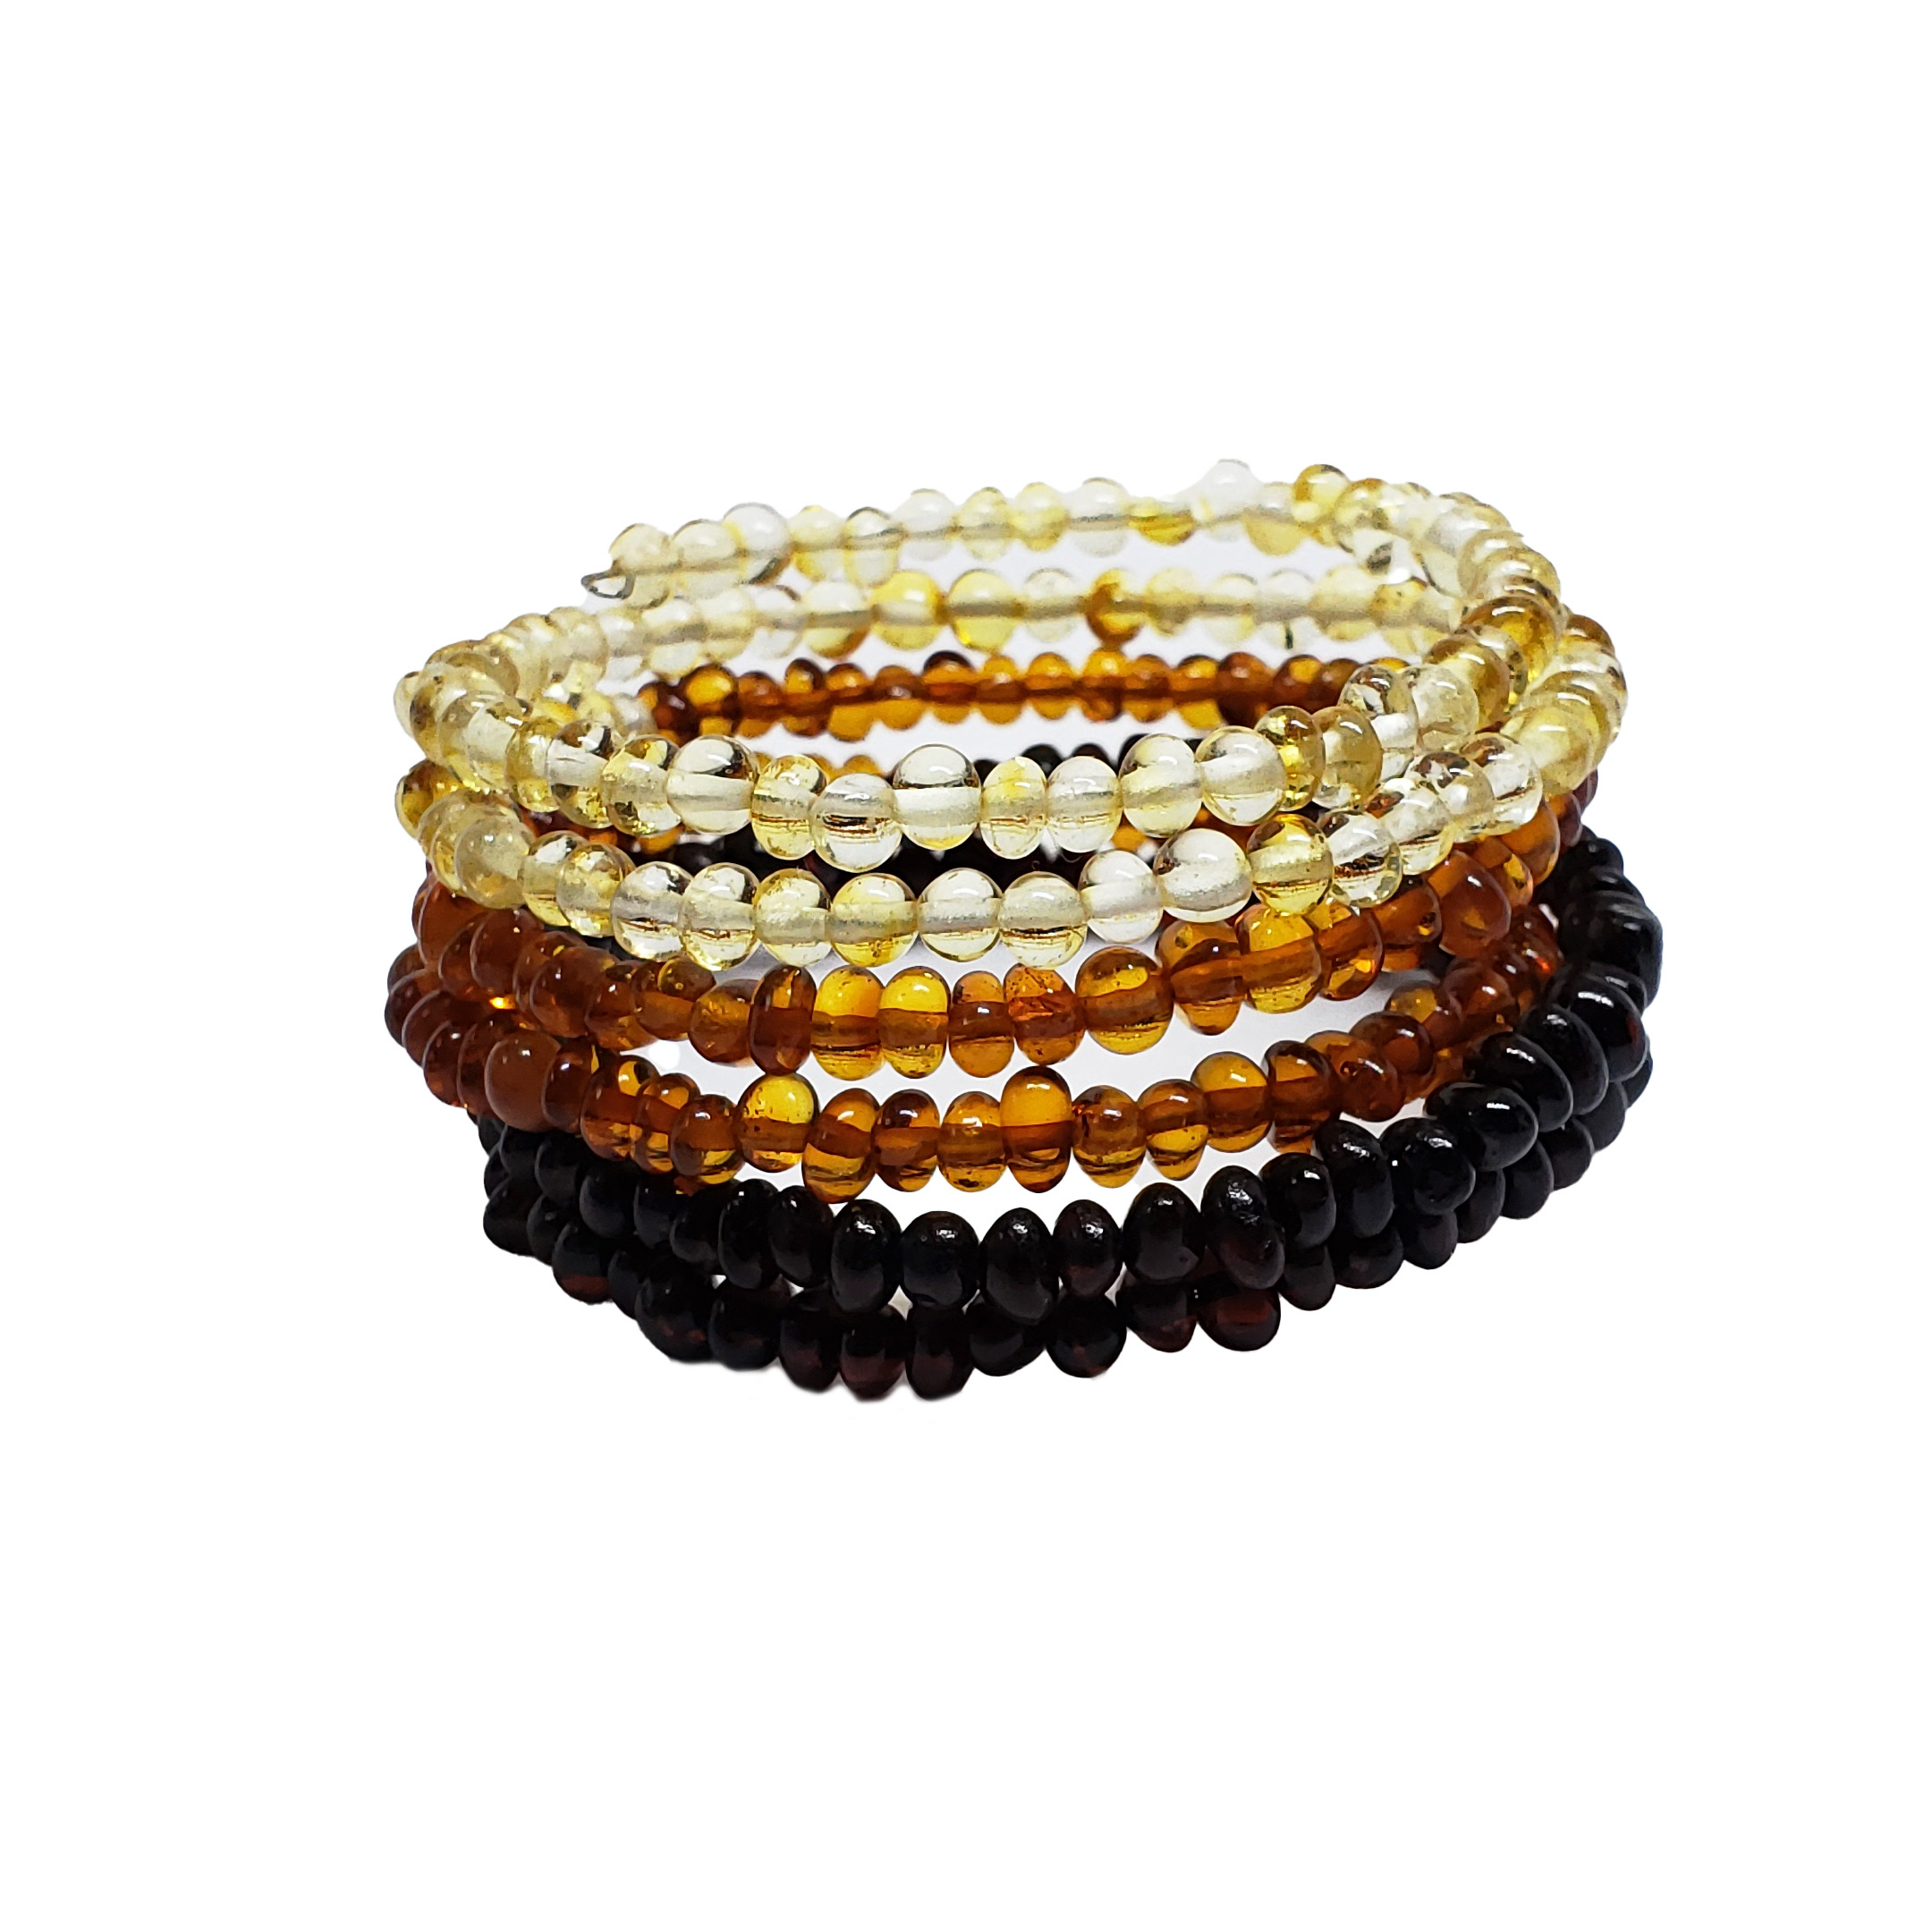 Baltic amber wrap bracelet with lemon yellow amber, honey brown amber, and cherry red amber